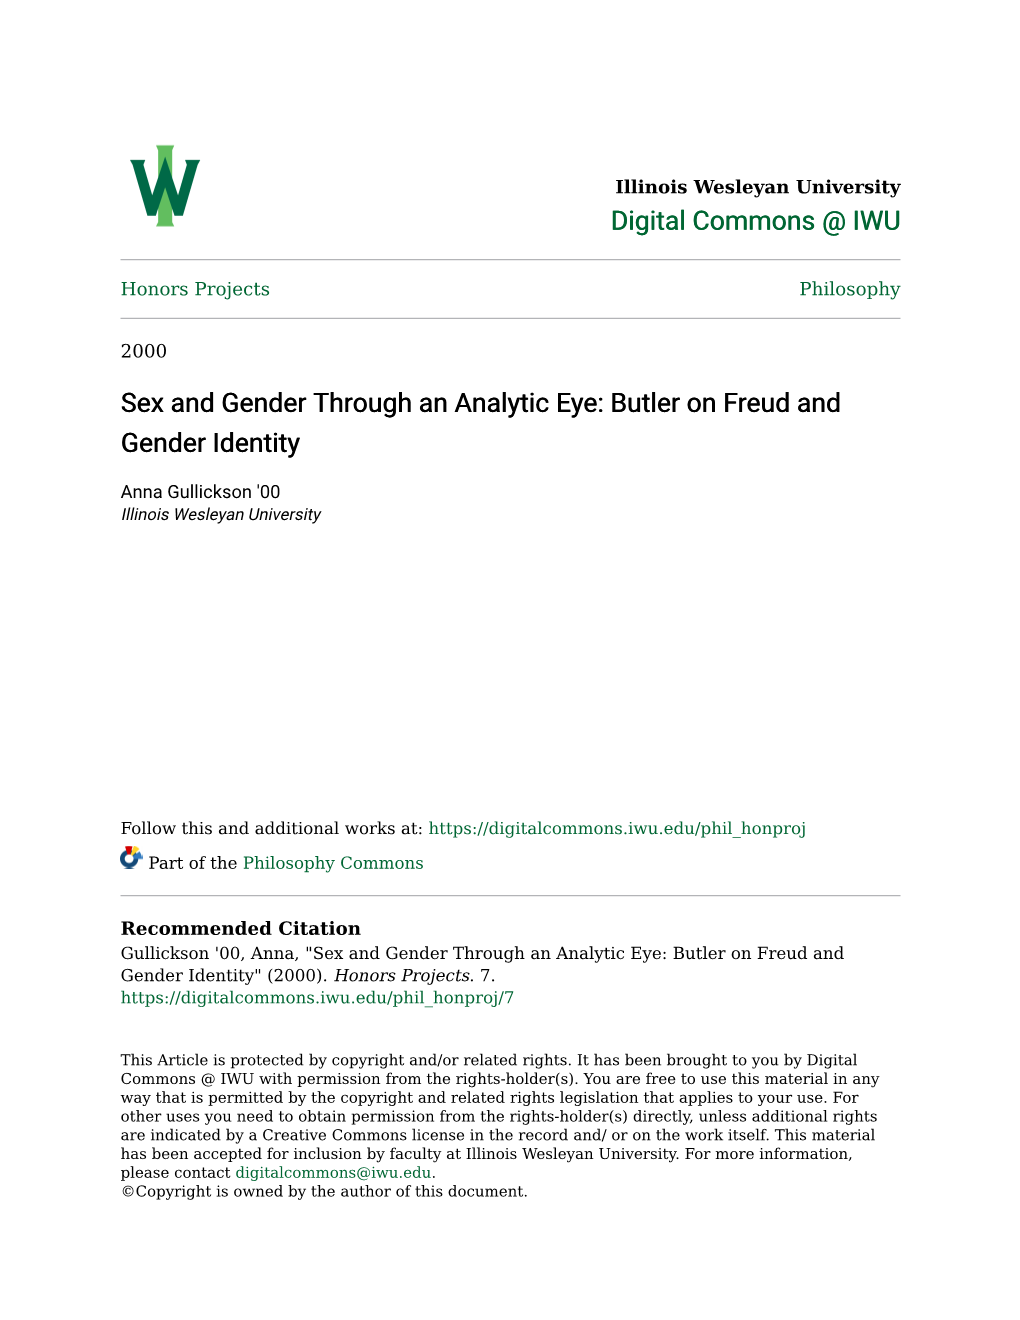 Sex and Gender Through an Analytic Eye: Butler on Freud and Gender Identity